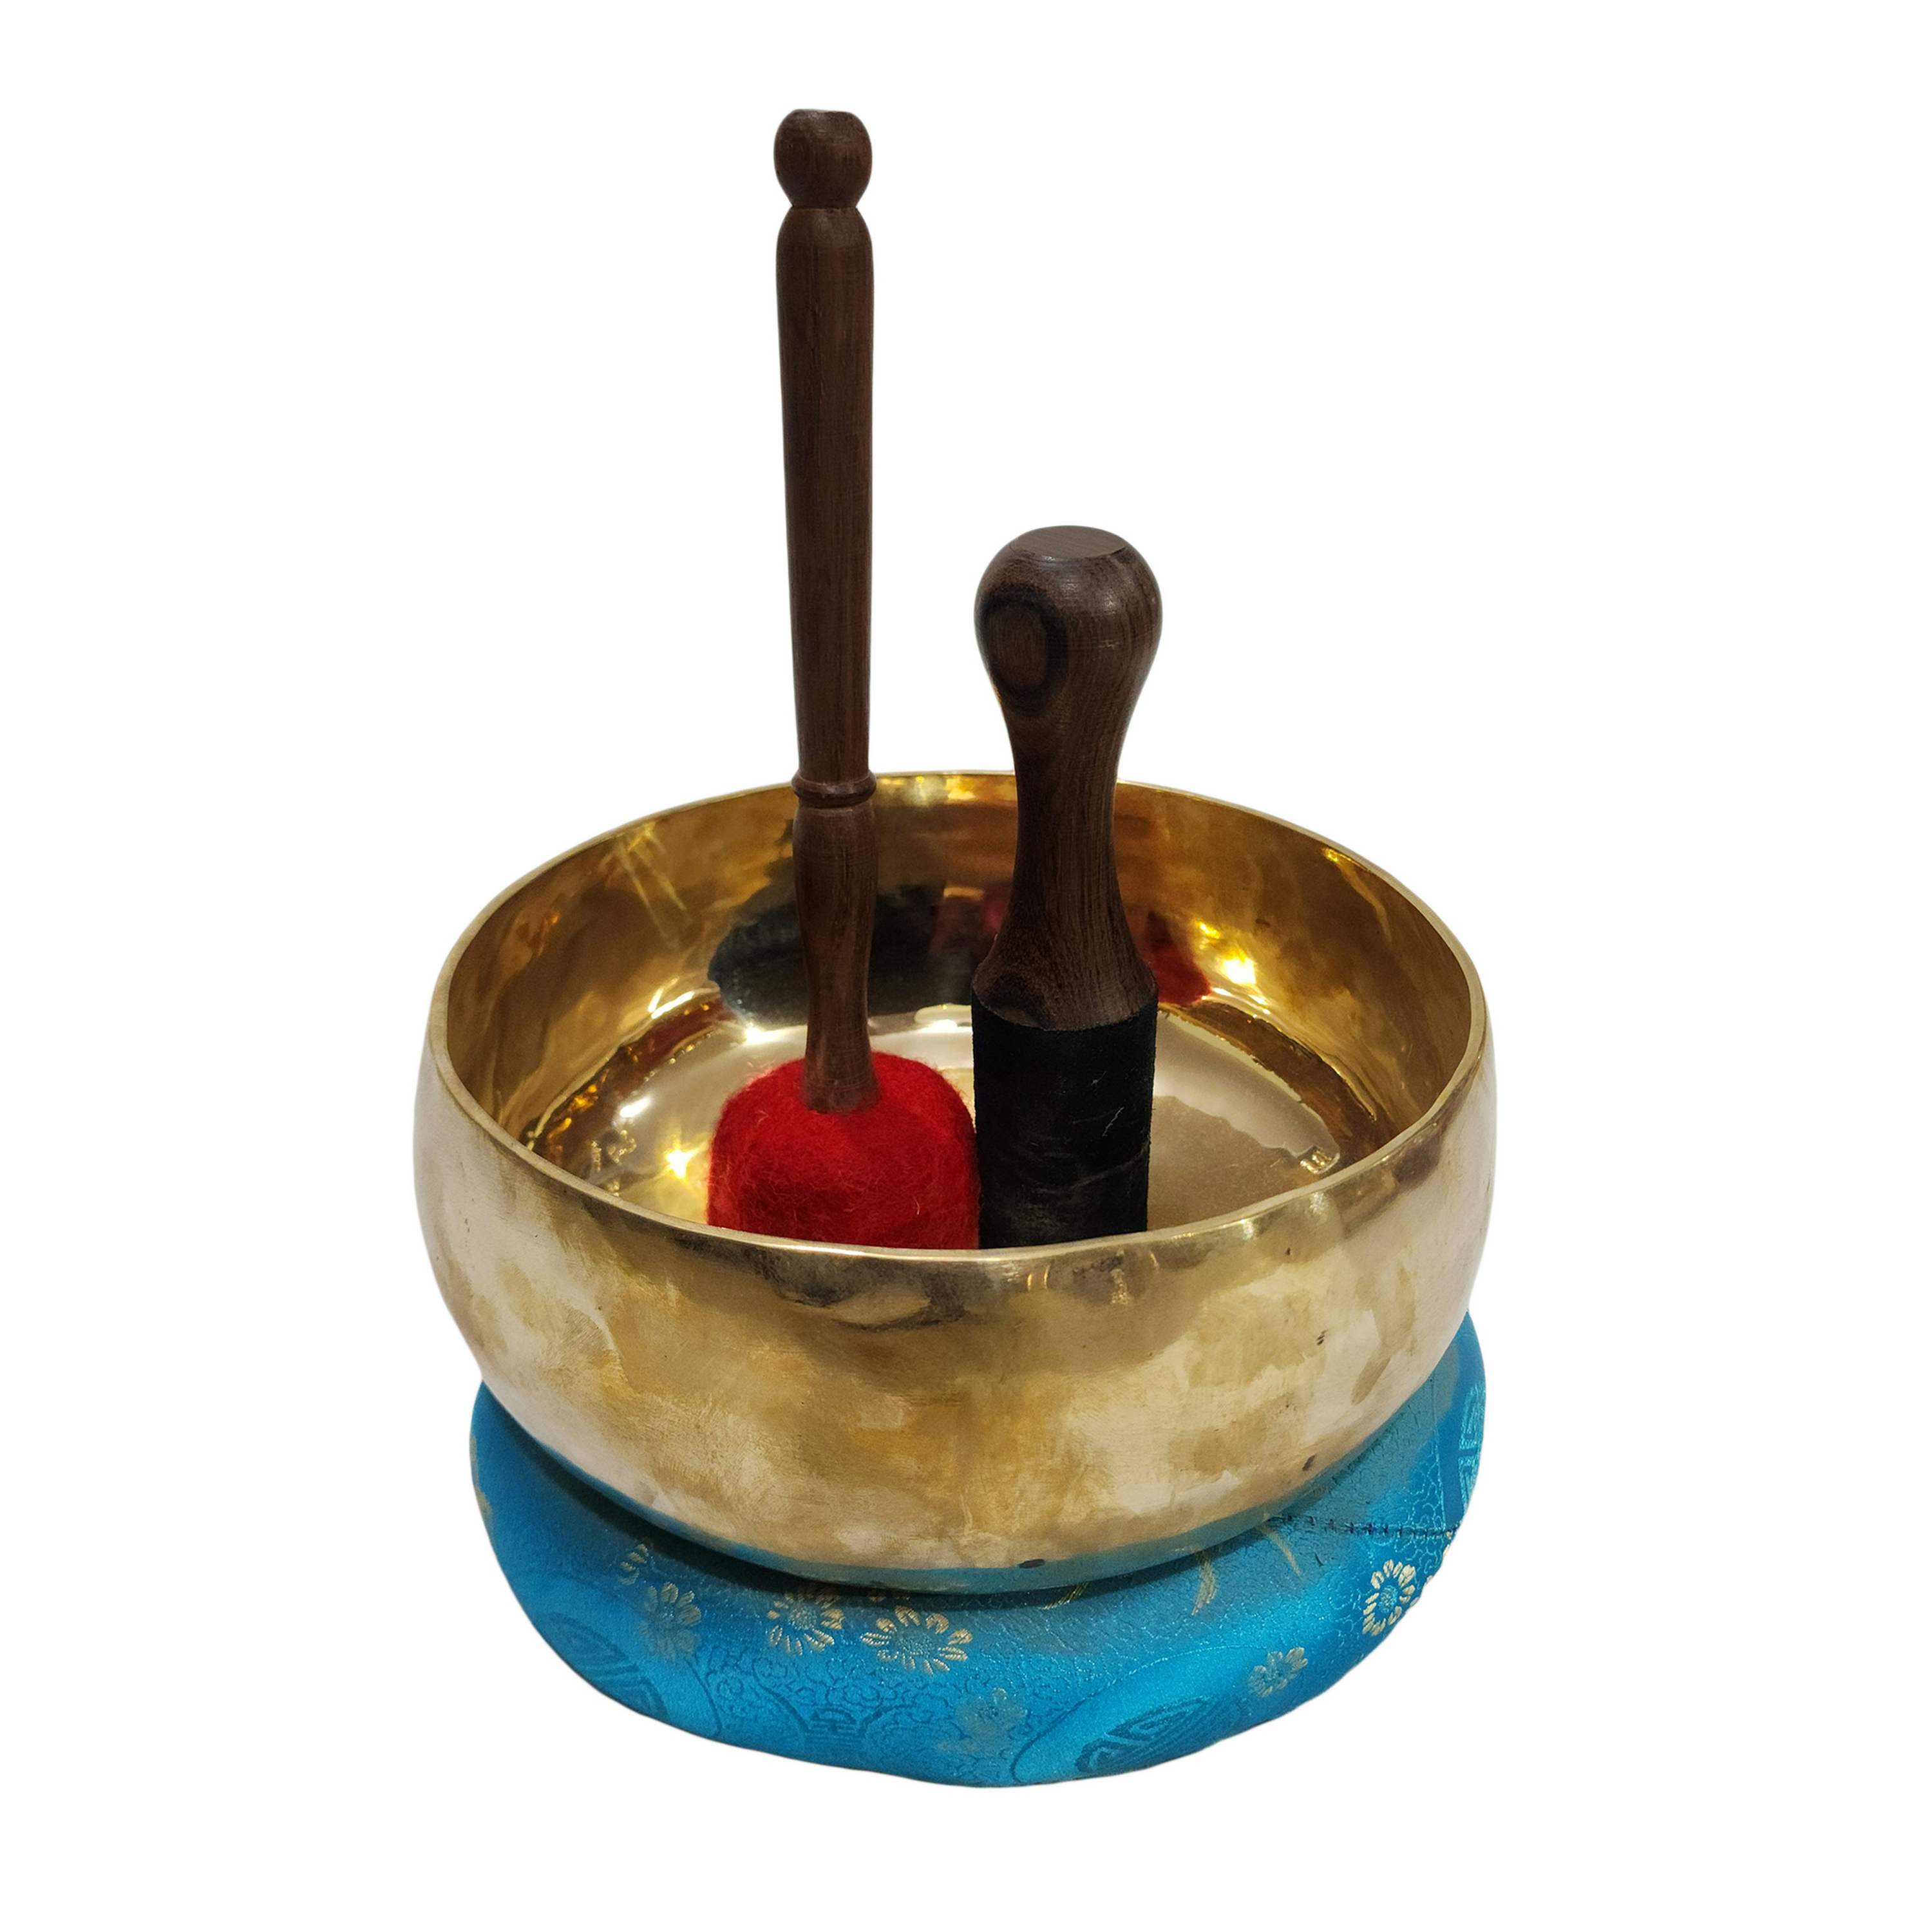 Singing Bowl, Buddhist Hand Beaten Therapy Bowls, With Glossy Finishing, Head Bowl